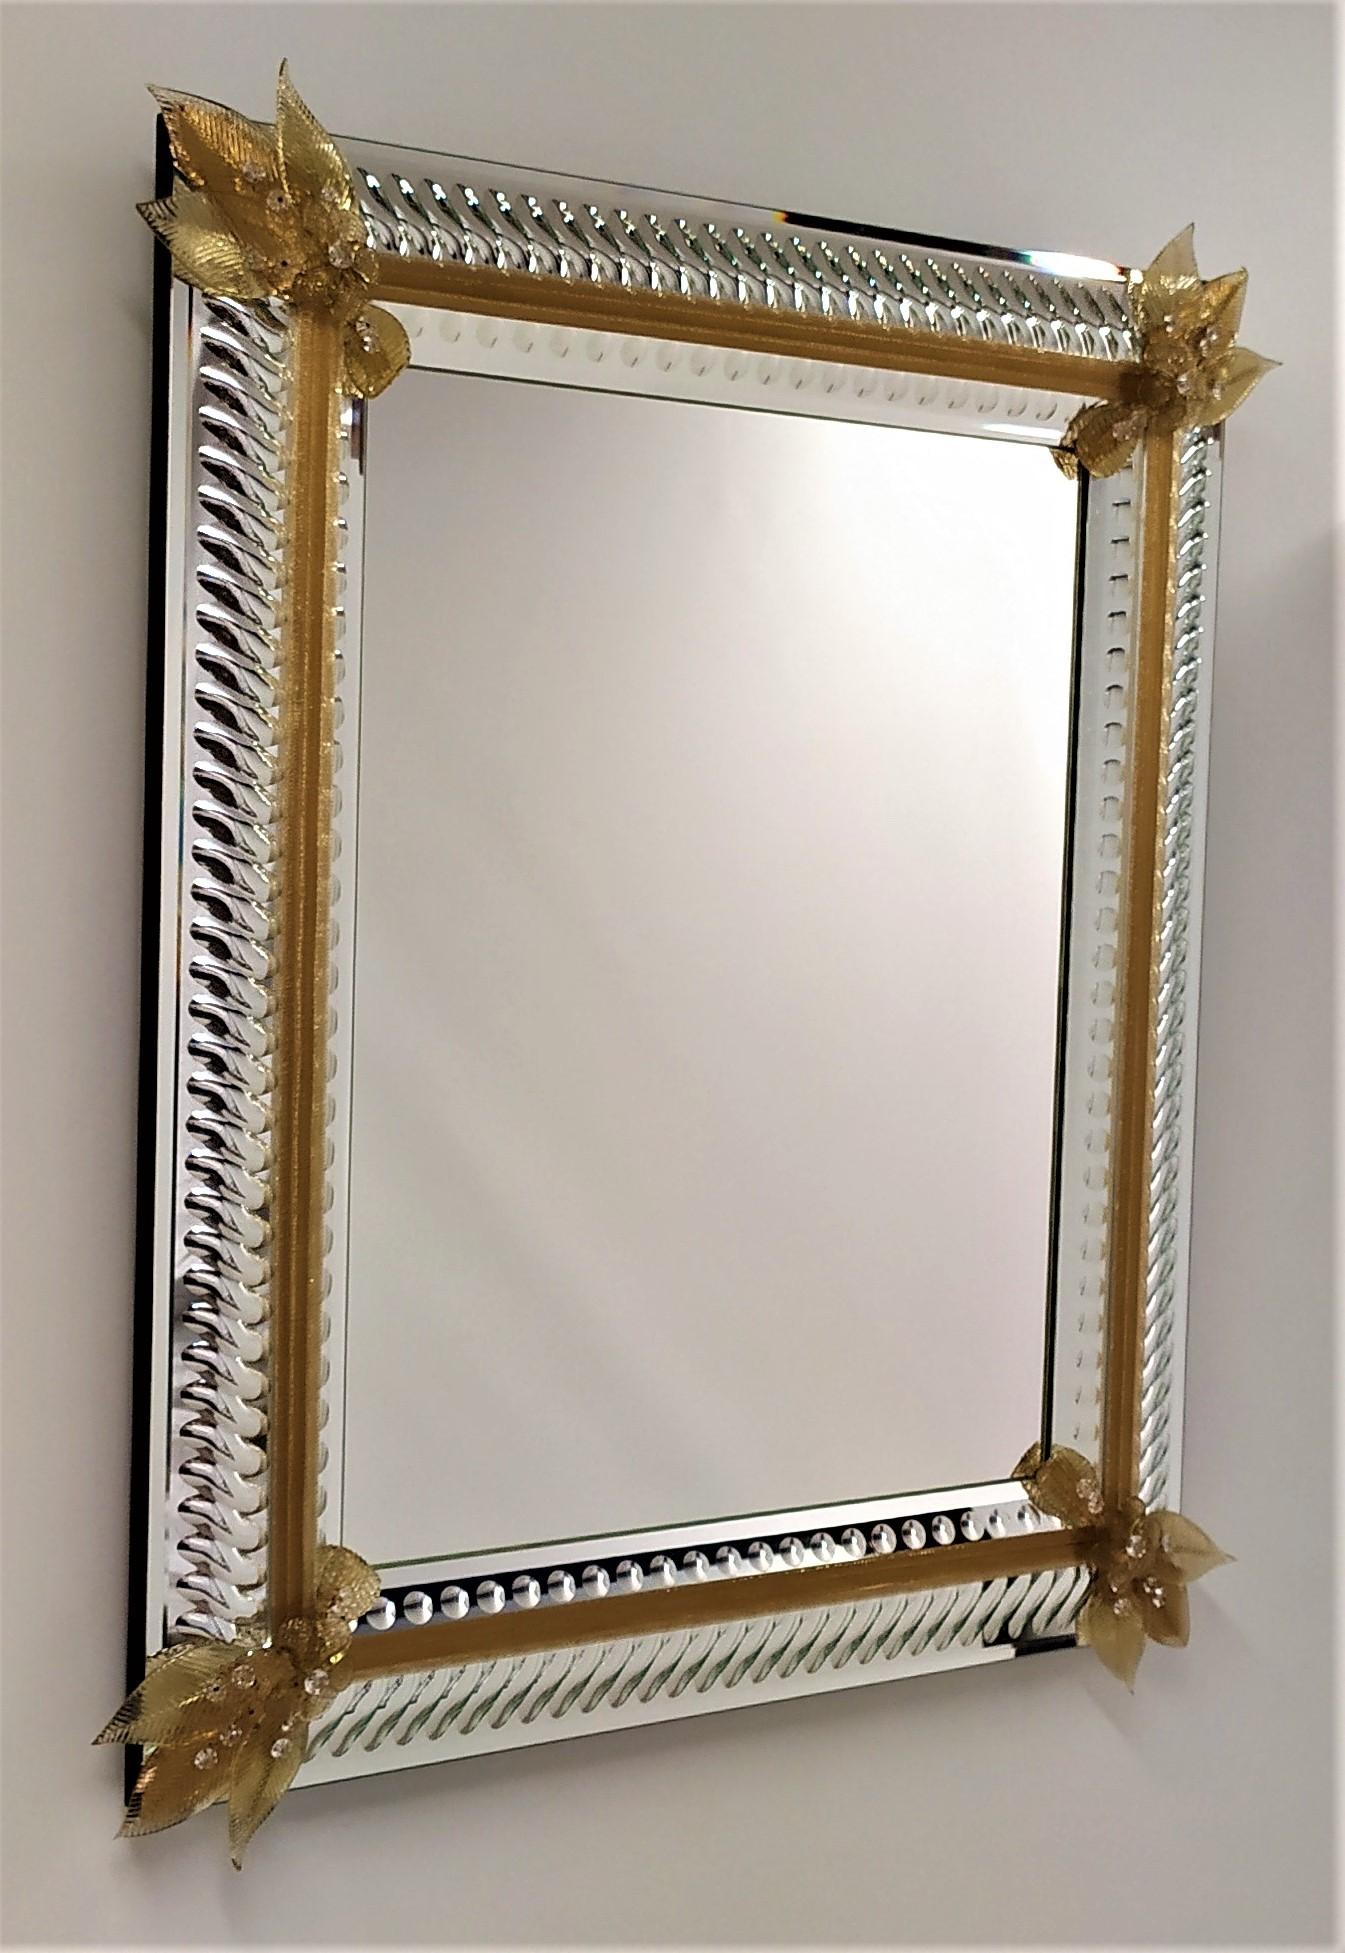 Shimmering rectangular mirror in Murano glass, composed of a frame that embraces the central mirror, carved and polished with stone wheels totally by hand with subjects of waves and bubbles, in the four particular corners in crystal with gold leaf